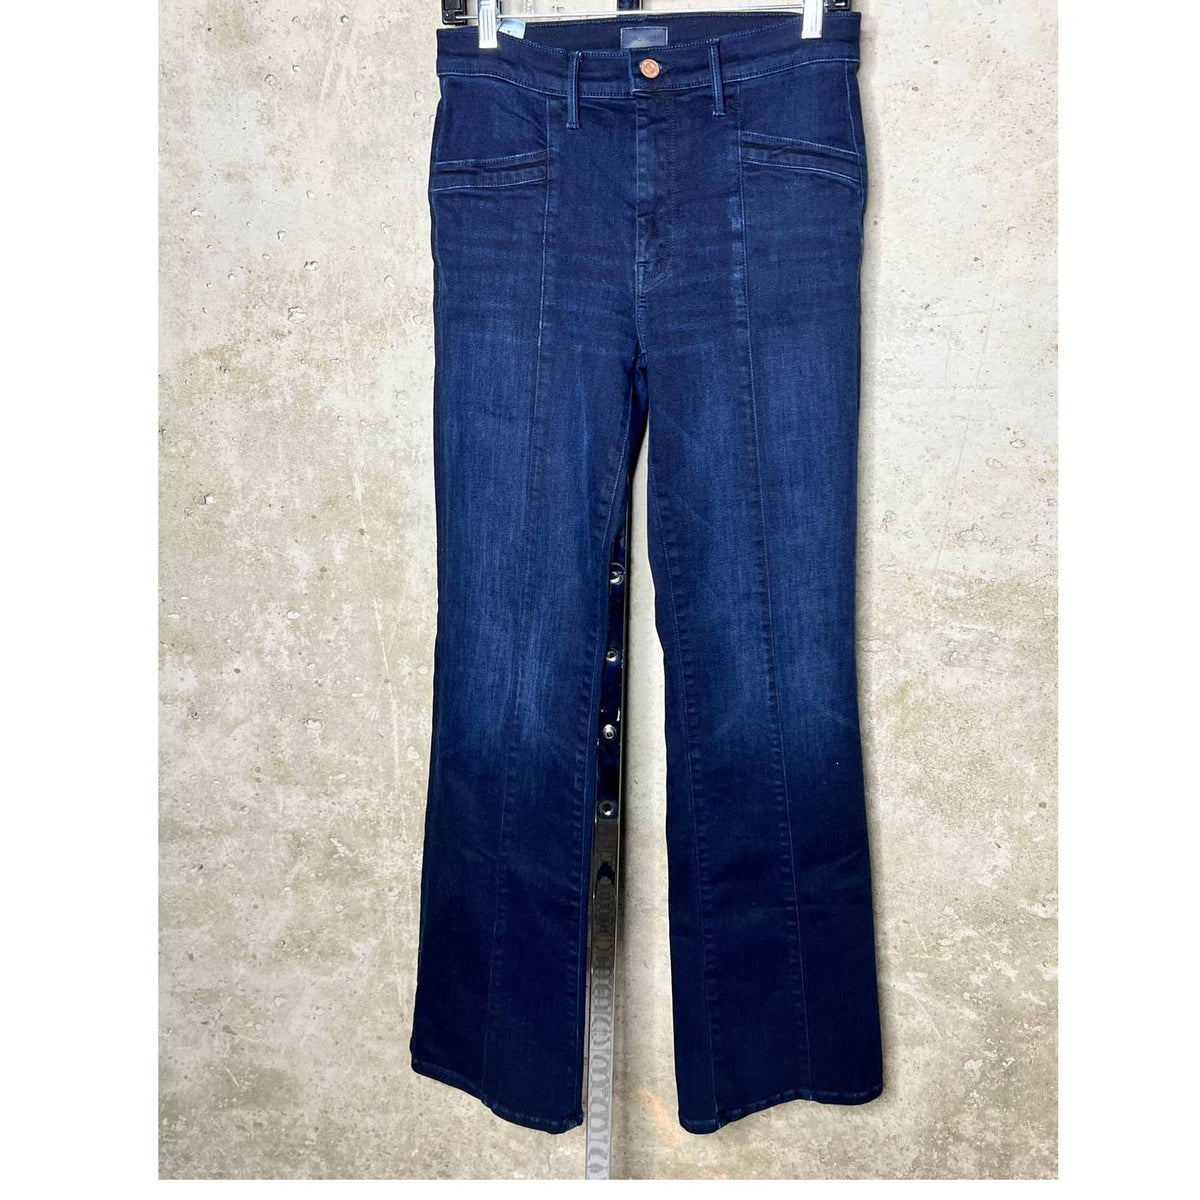 Mother The Slant Drama After Party Wash Jeans Sz.29